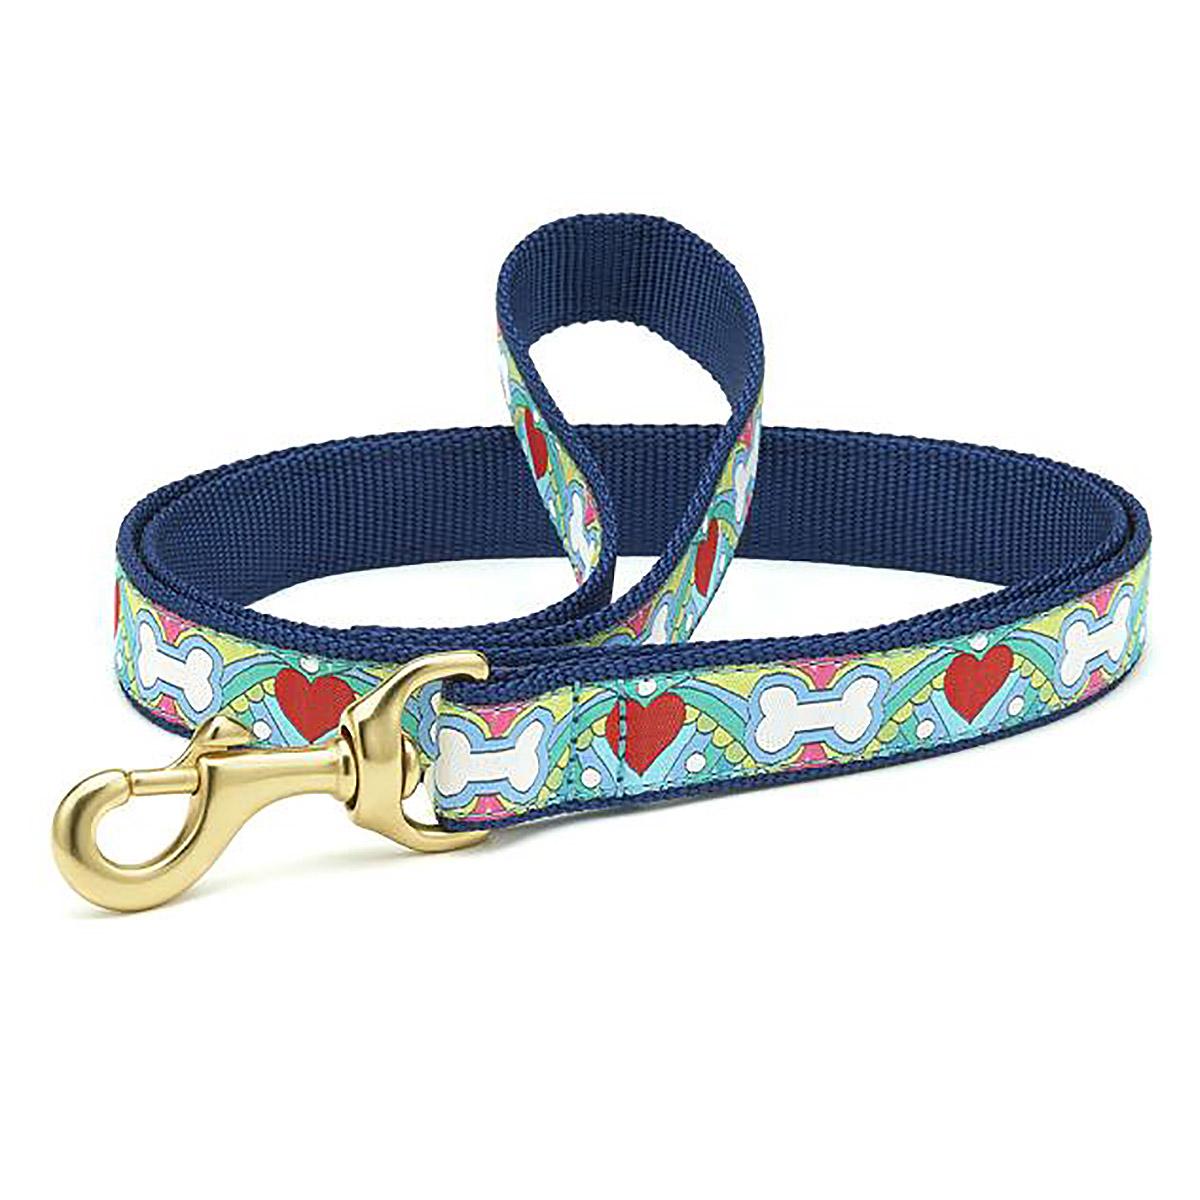 Coloring Book Dog Leash by Up Country